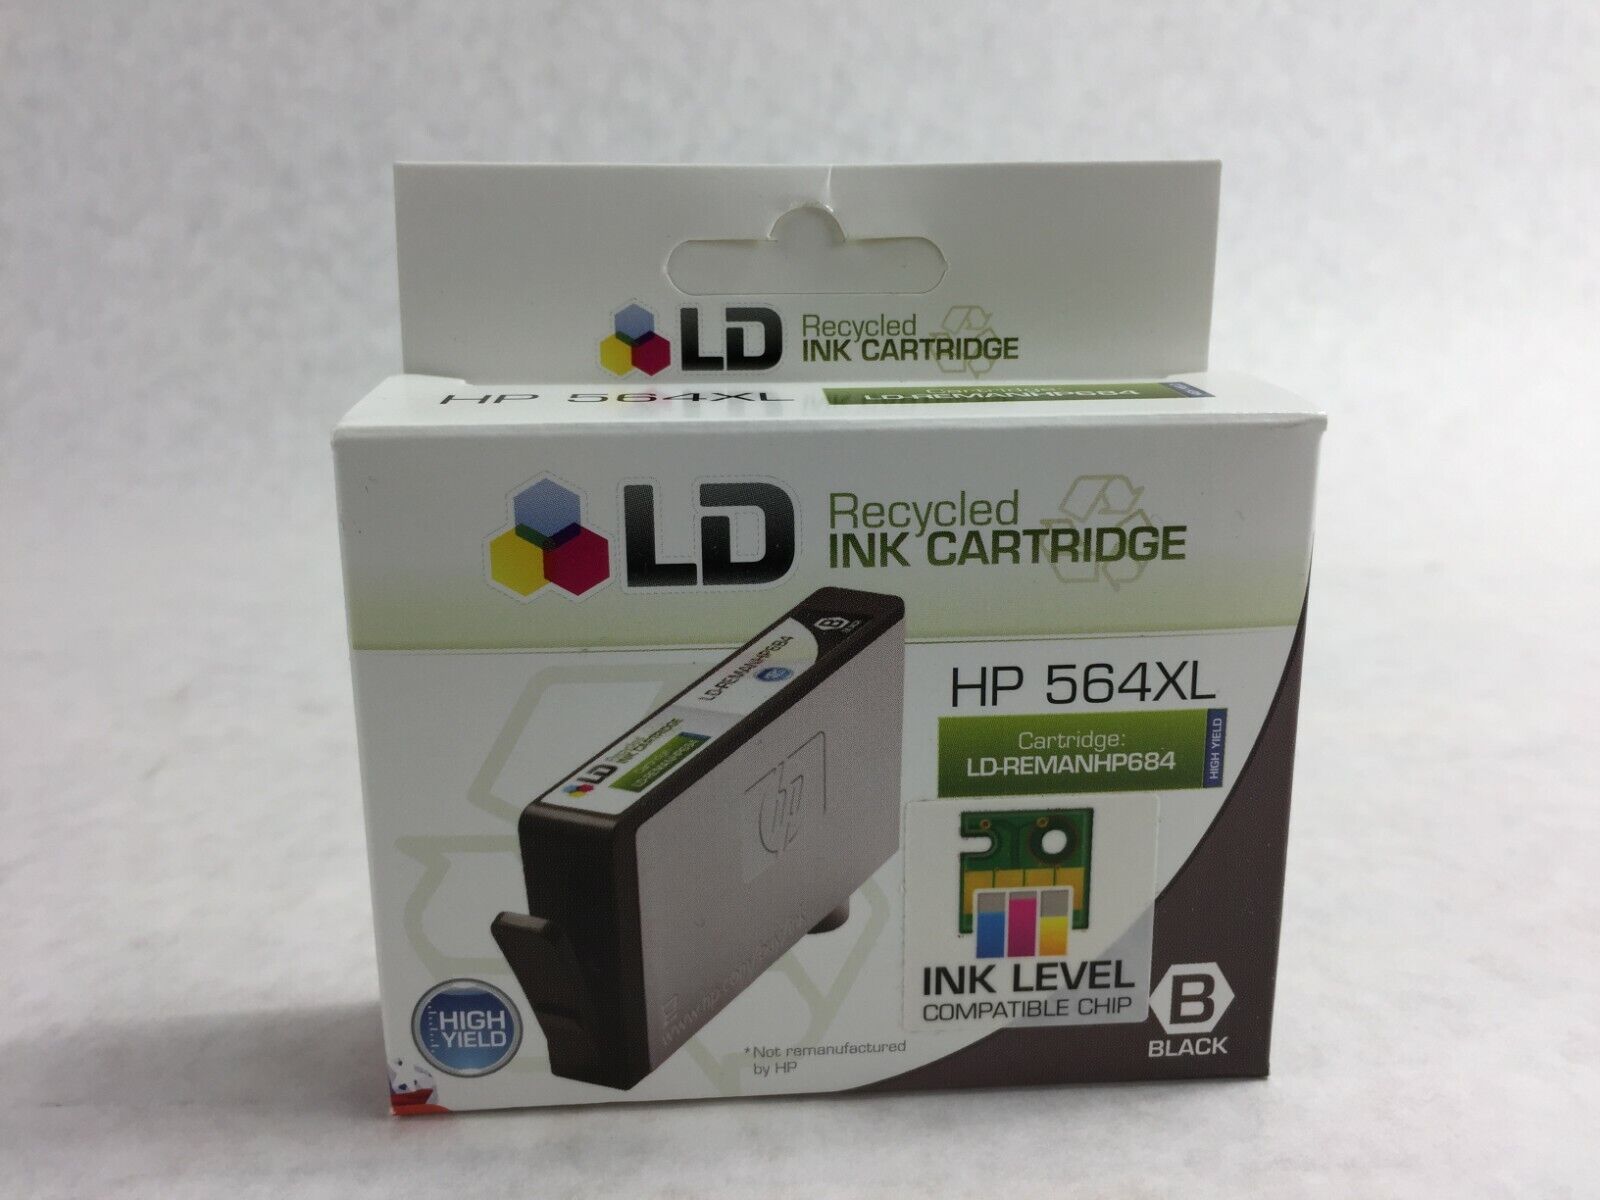 LD LD-REMANHP684 Black Ink Cartridge for HP 564XL   Factory Sealed